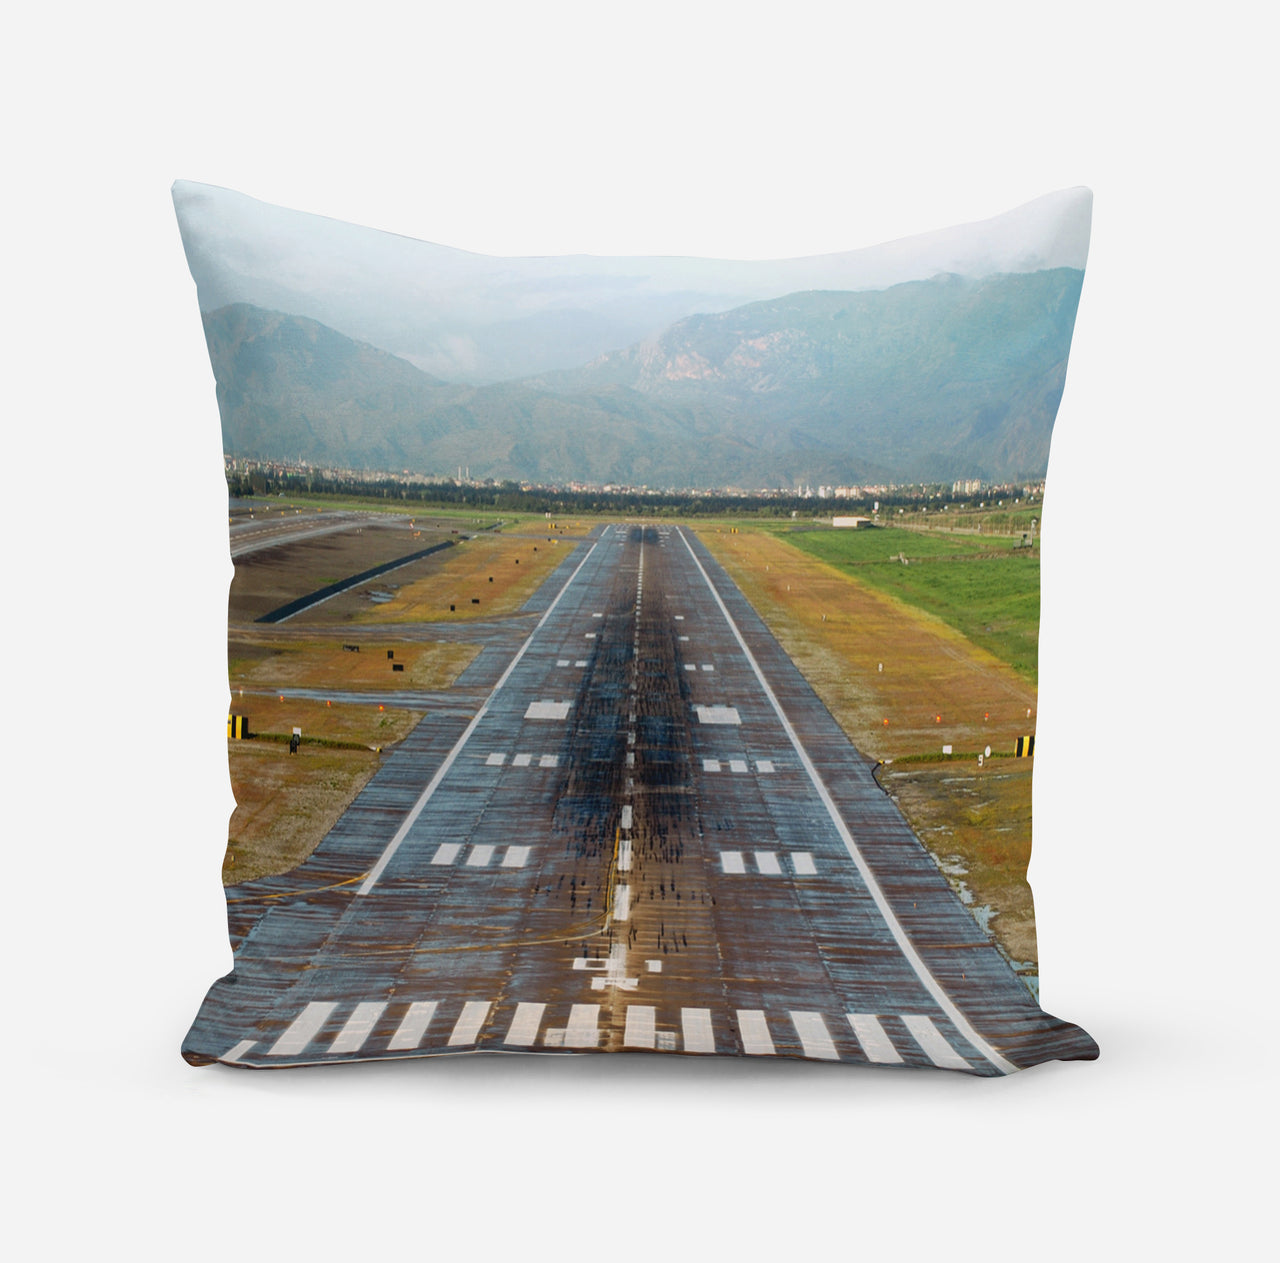 Amazing Mountain View & Runway Designed Pillows